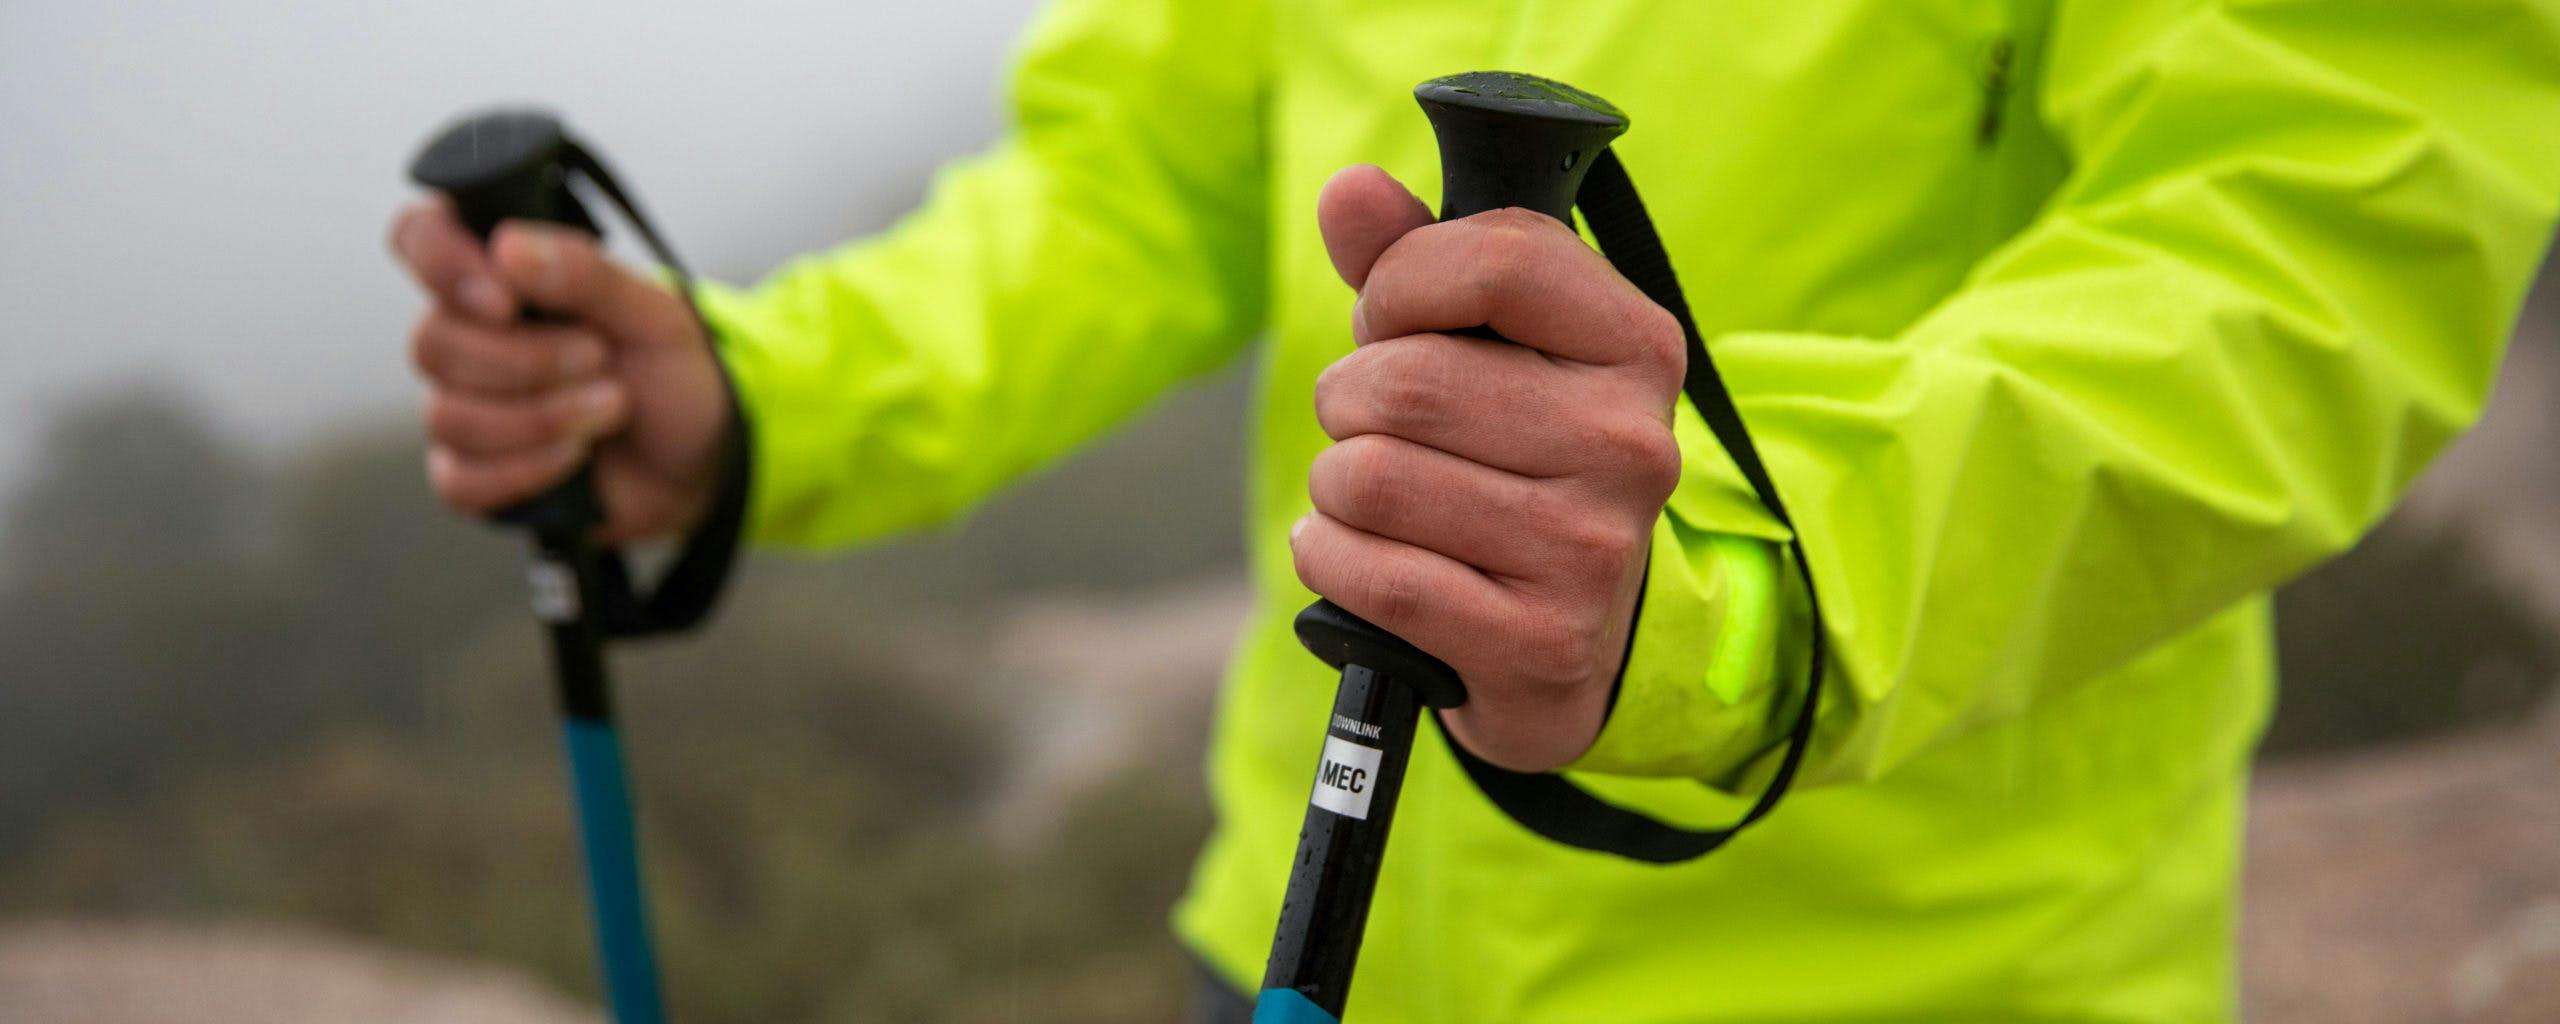 How to choose hiking poles and trekking poles